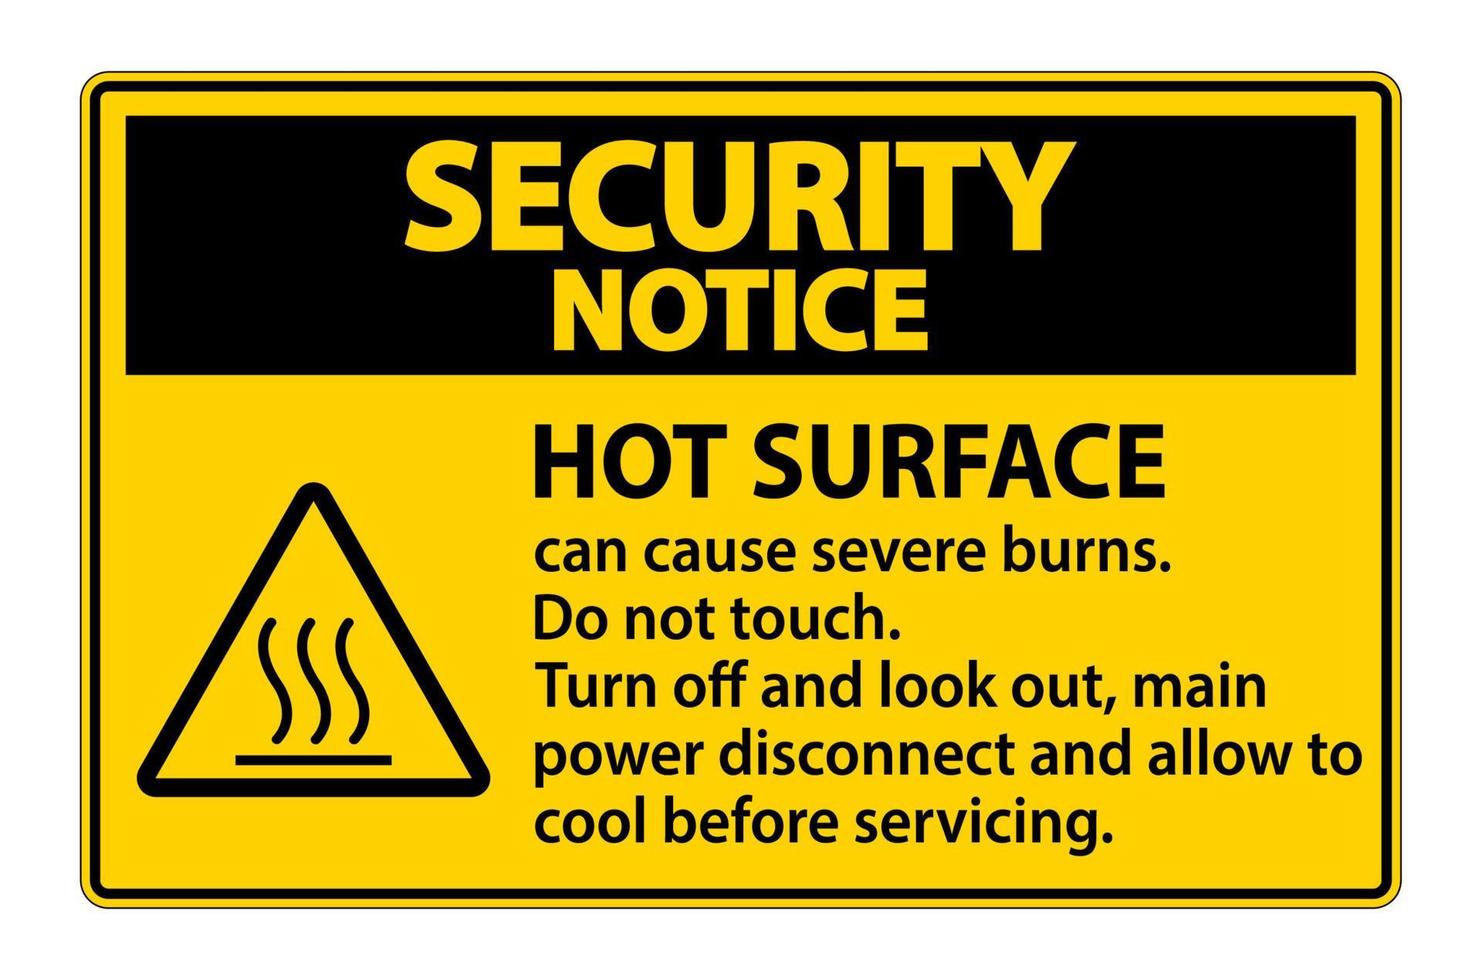 Security Notice Hot surface sign on white background vector